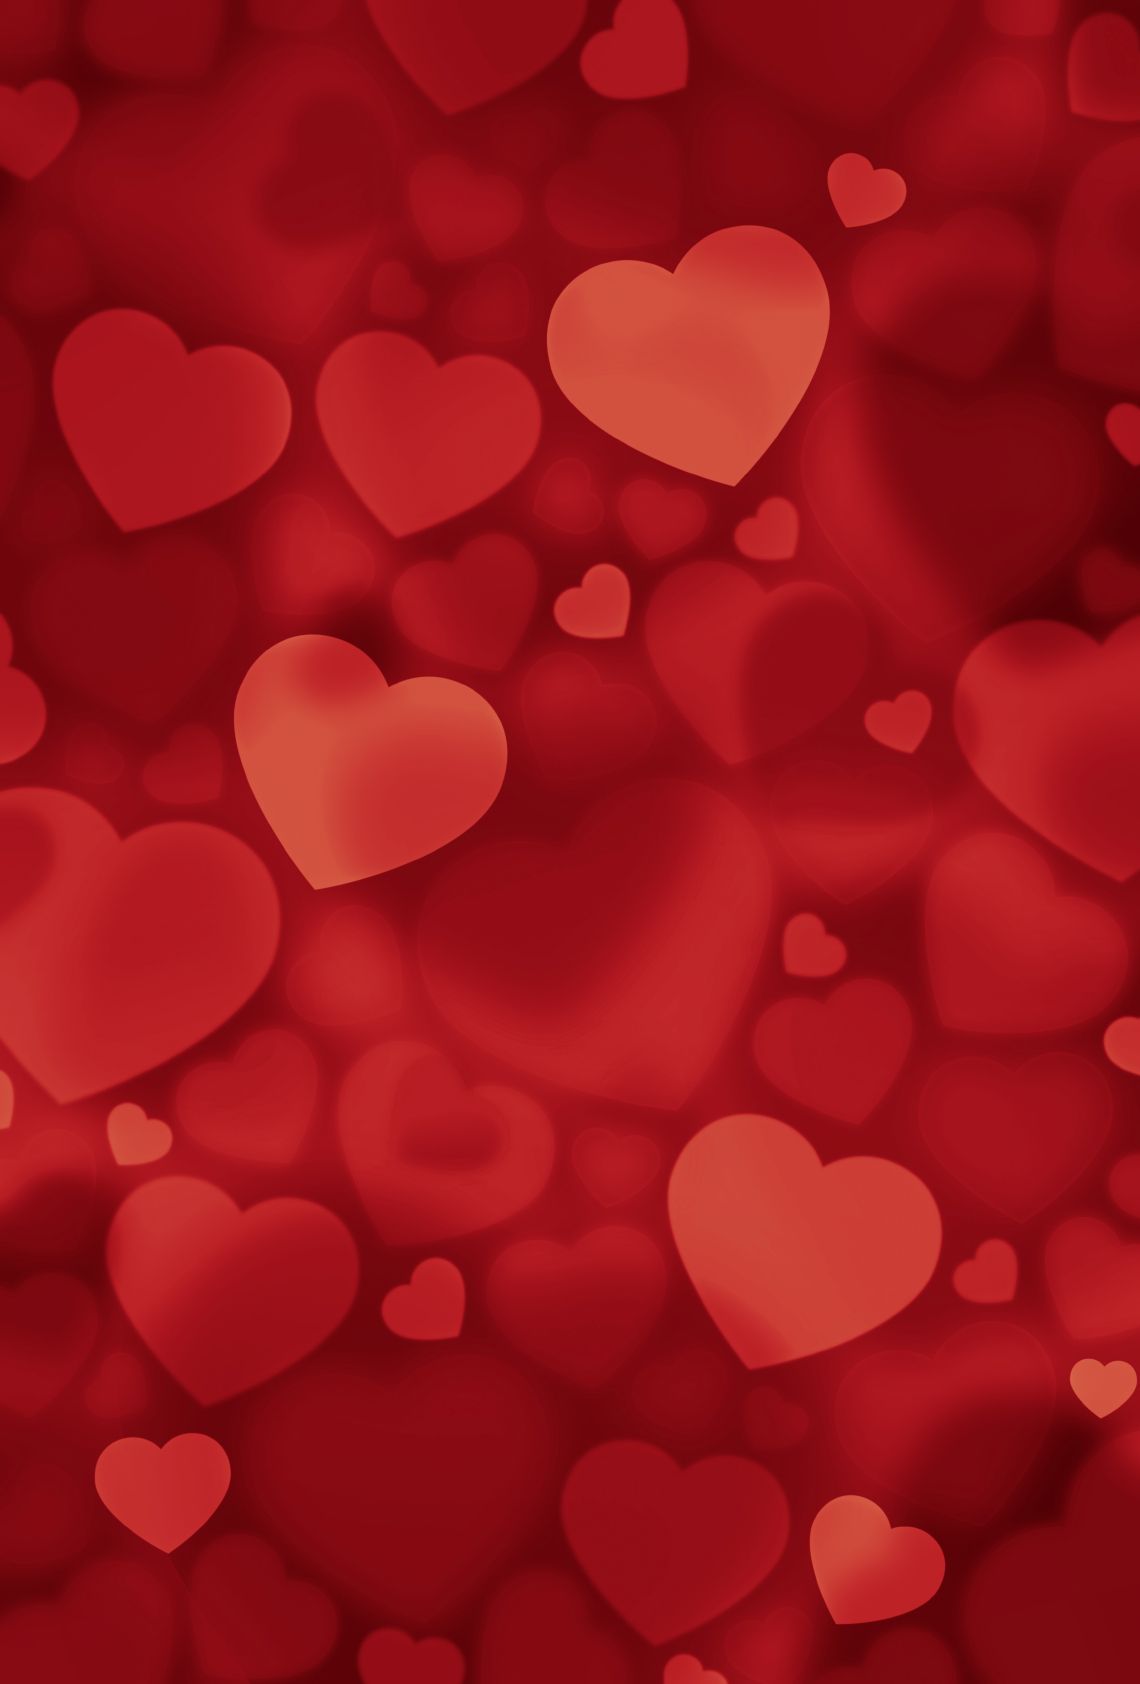 Red Love Heart Wallpaper Free Red Love Heart Background